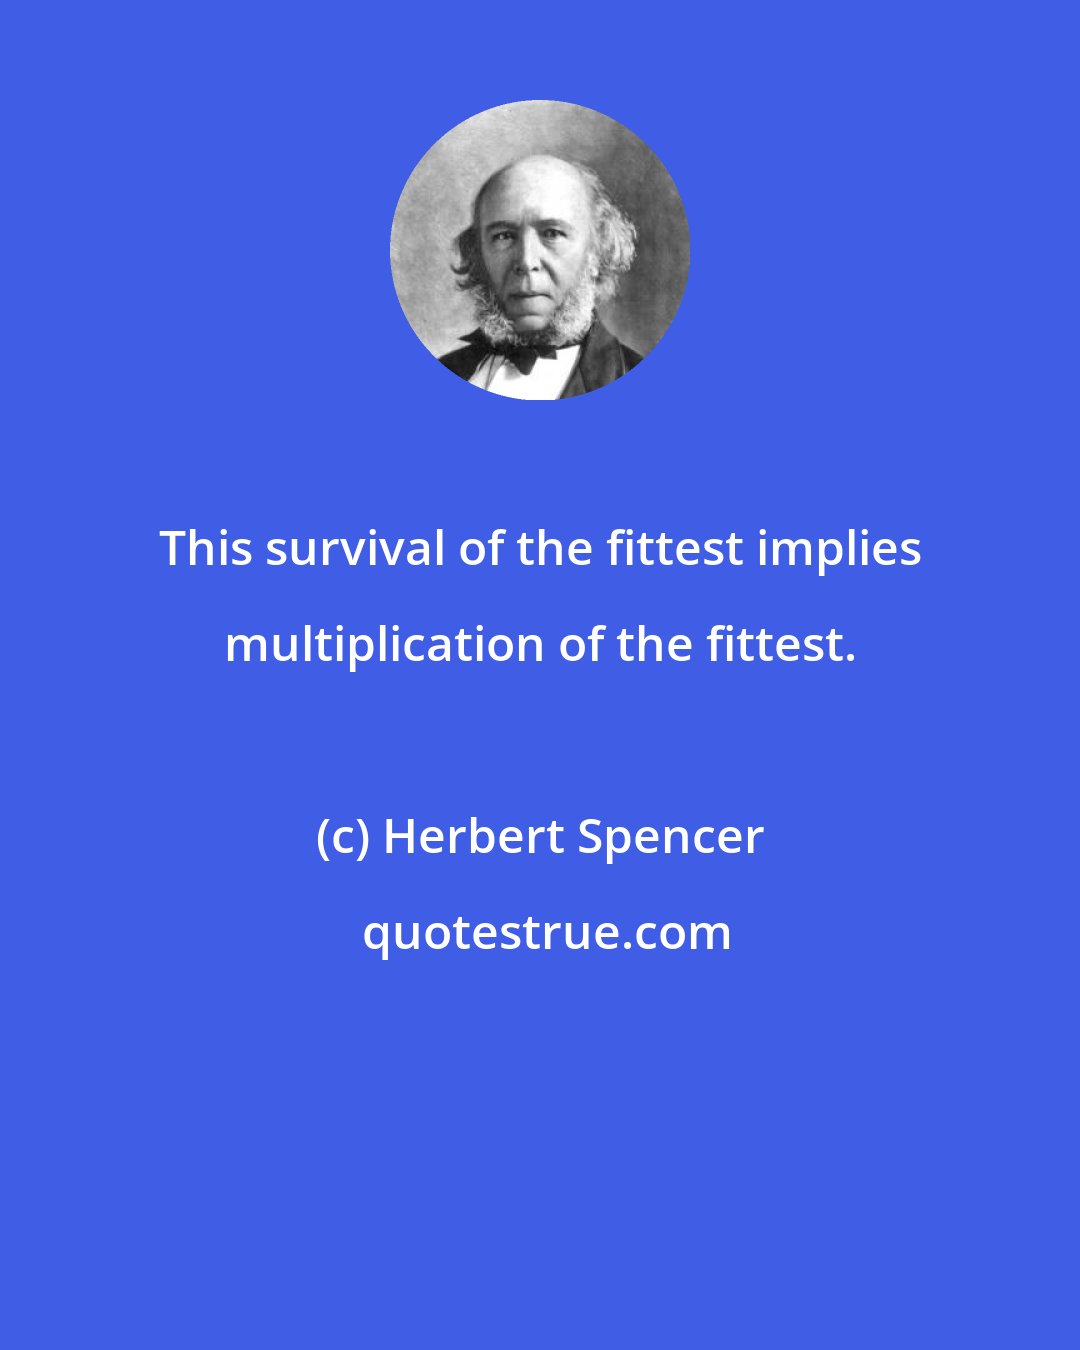 Herbert Spencer: This survival of the fittest implies multiplication of the fittest.